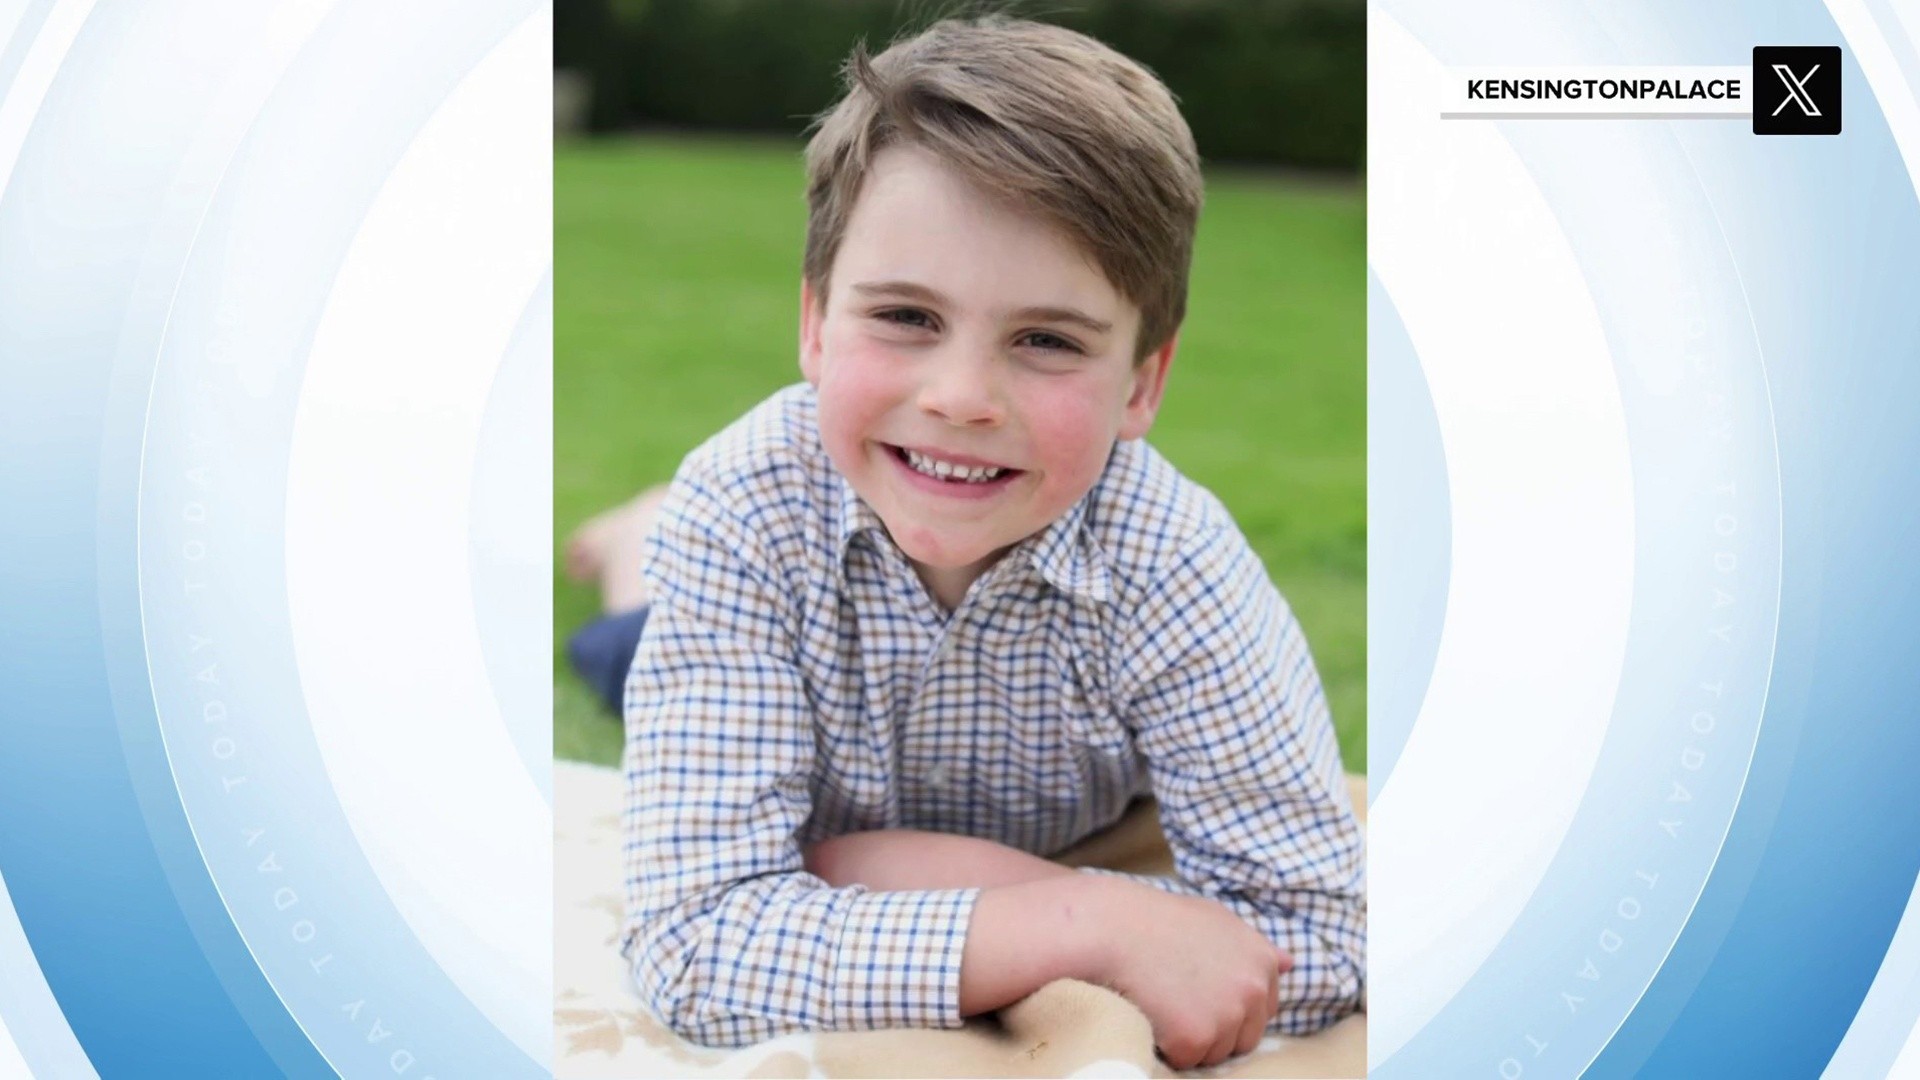 Photo taken by Kate released to mark Prince Louis's 6th birthday